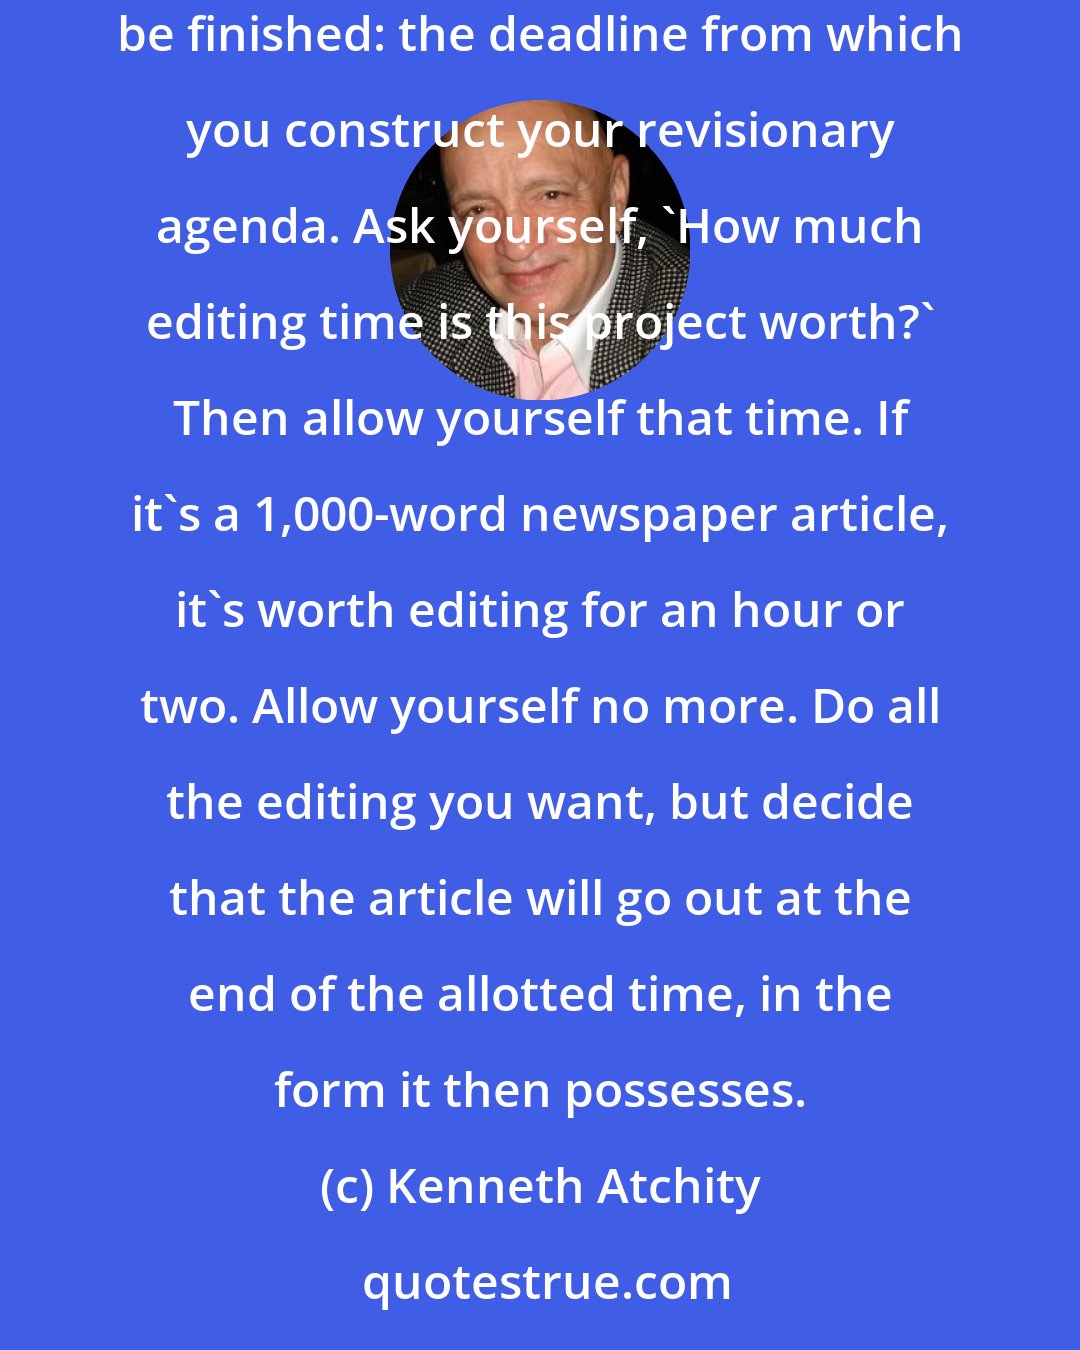 Kenneth Atchity: You must stop editing--or you'll never finish anything. Begin with a time-management decision that indicates when the editing is to be finished: the deadline from which you construct your revisionary agenda. Ask yourself, 'How much editing time is this project worth?' Then allow yourself that time. If it's a 1,000-word newspaper article, it's worth editing for an hour or two. Allow yourself no more. Do all the editing you want, but decide that the article will go out at the end of the allotted time, in the form it then possesses.